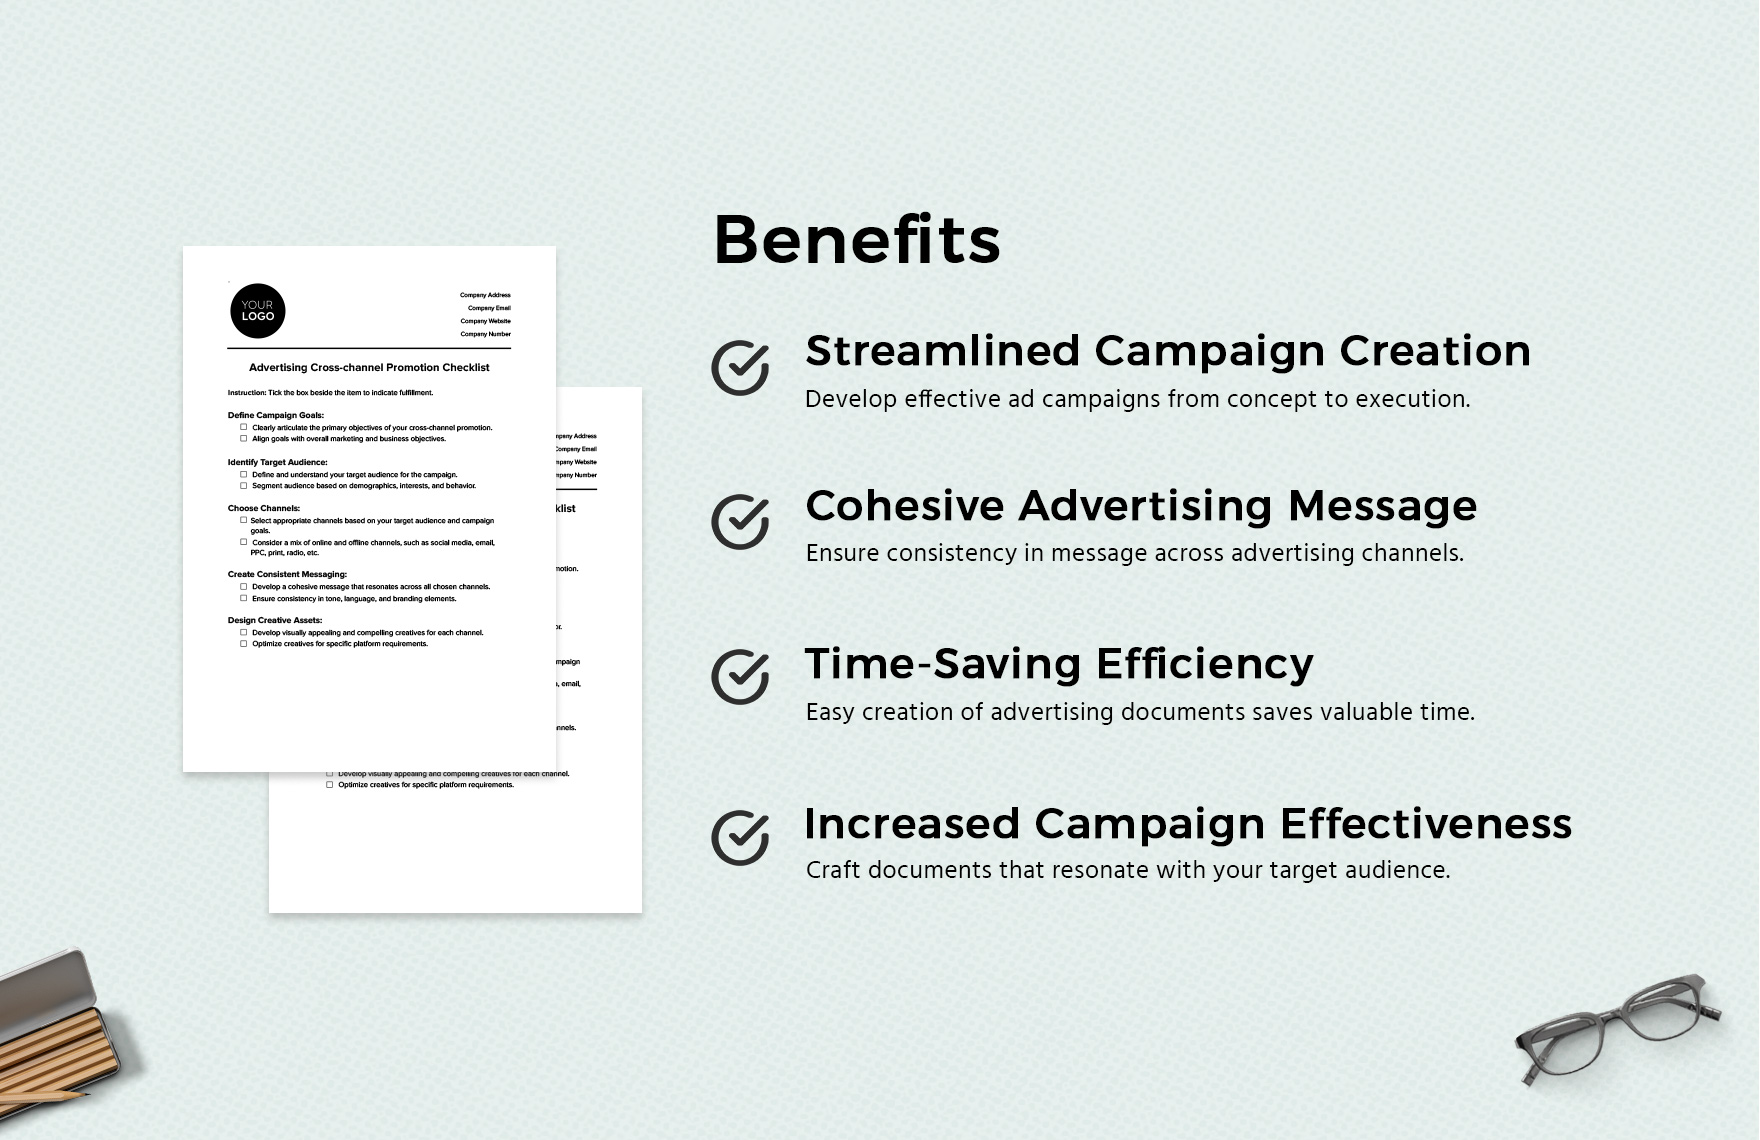 Advertising Cross-channel Promotion Checklist Template